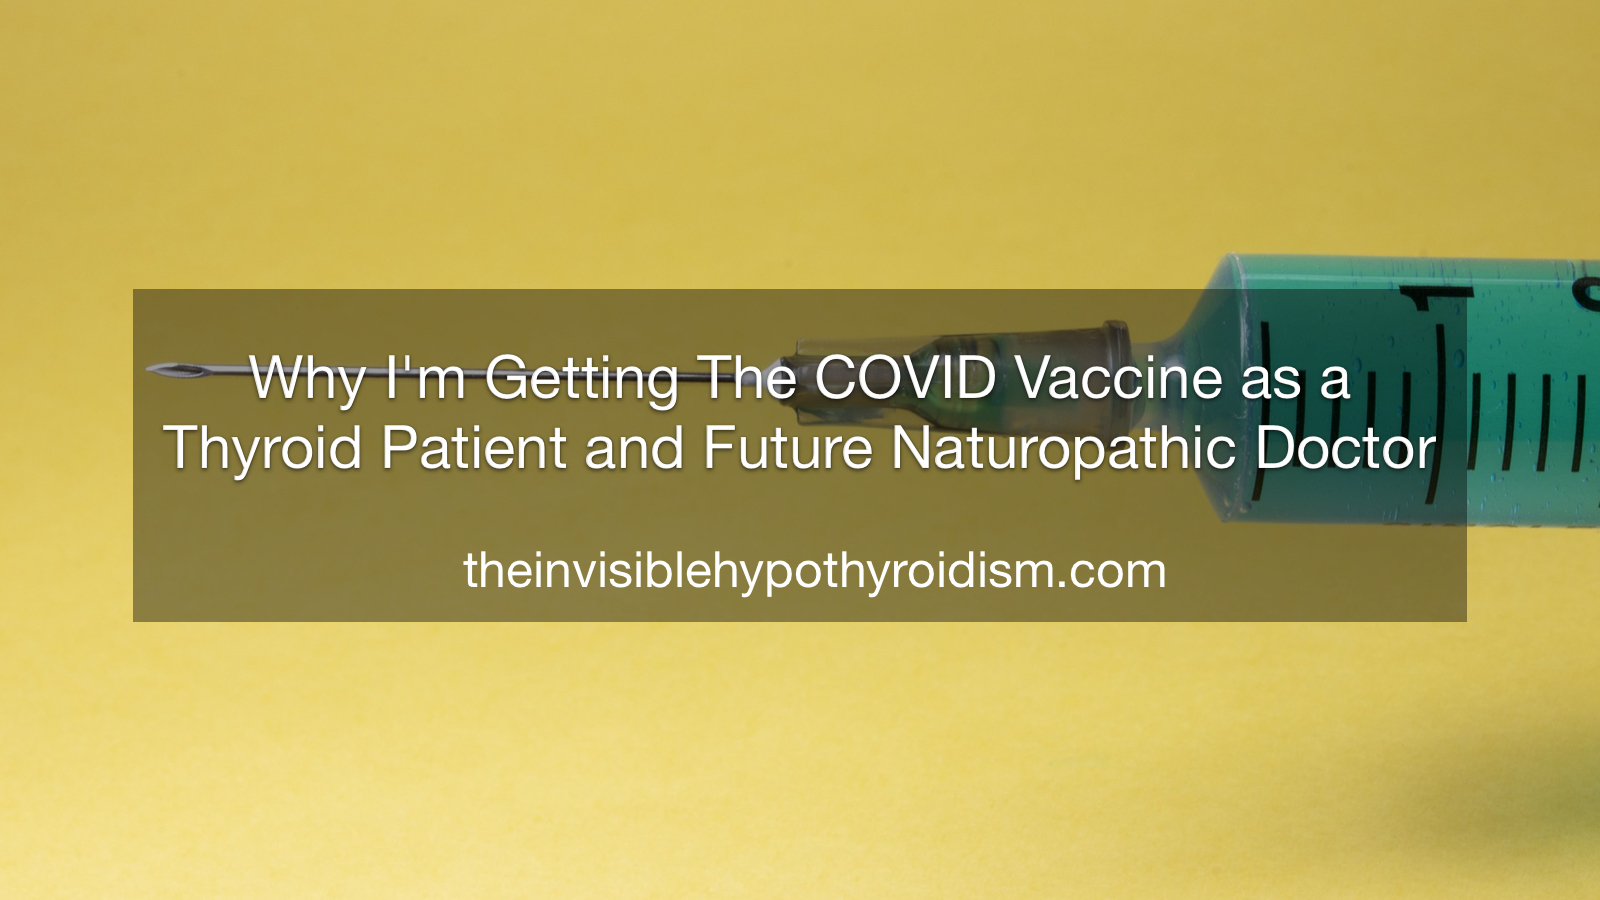 Why I'm Getting The COVID Vaccine as a Thyroid Patient and Future Naturopathic Doctor